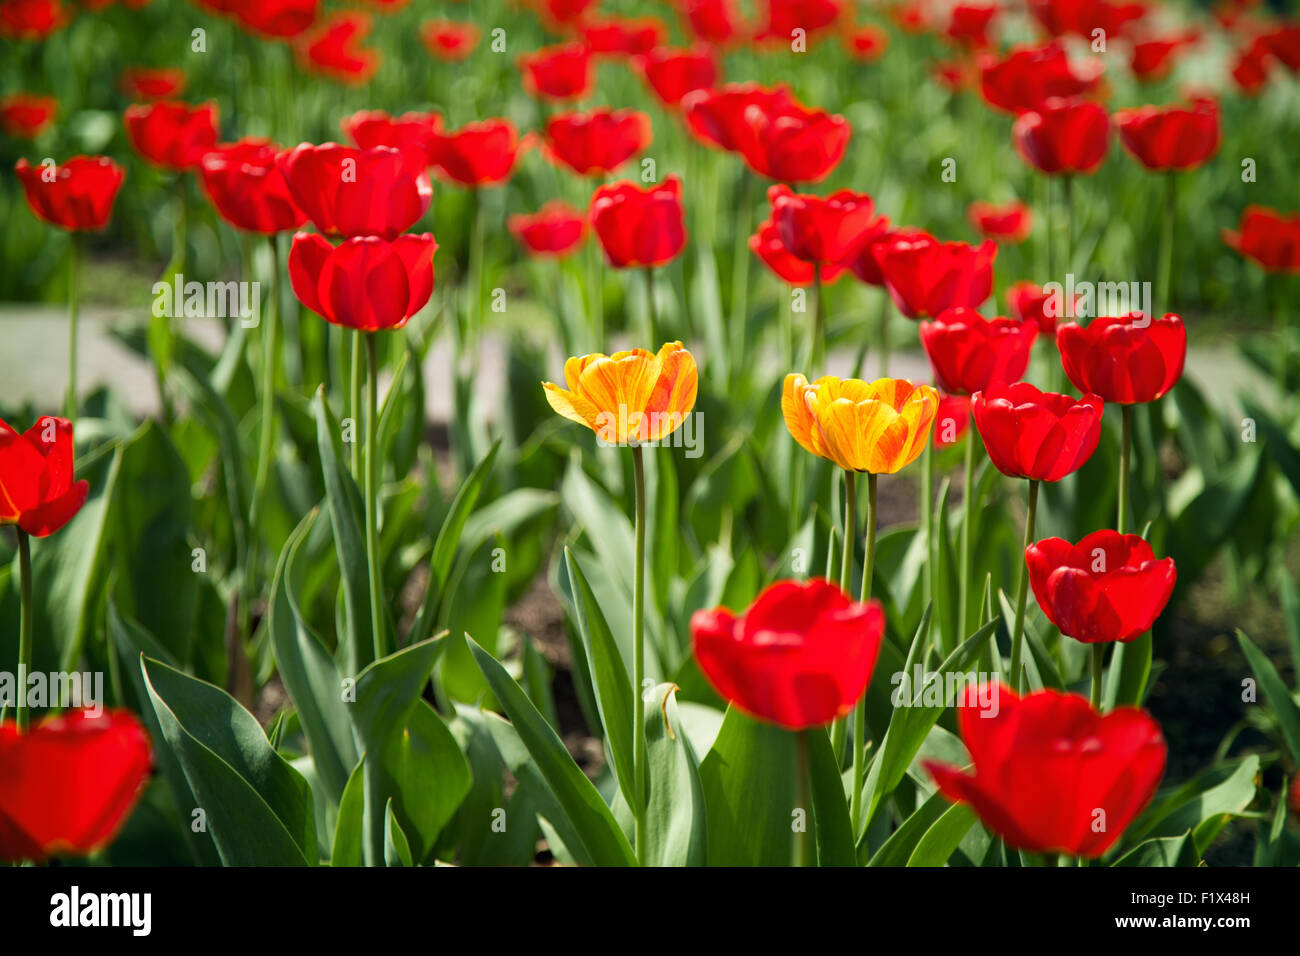 flowerbed of red and yellow tulips isolated on a white background. Stock Photo